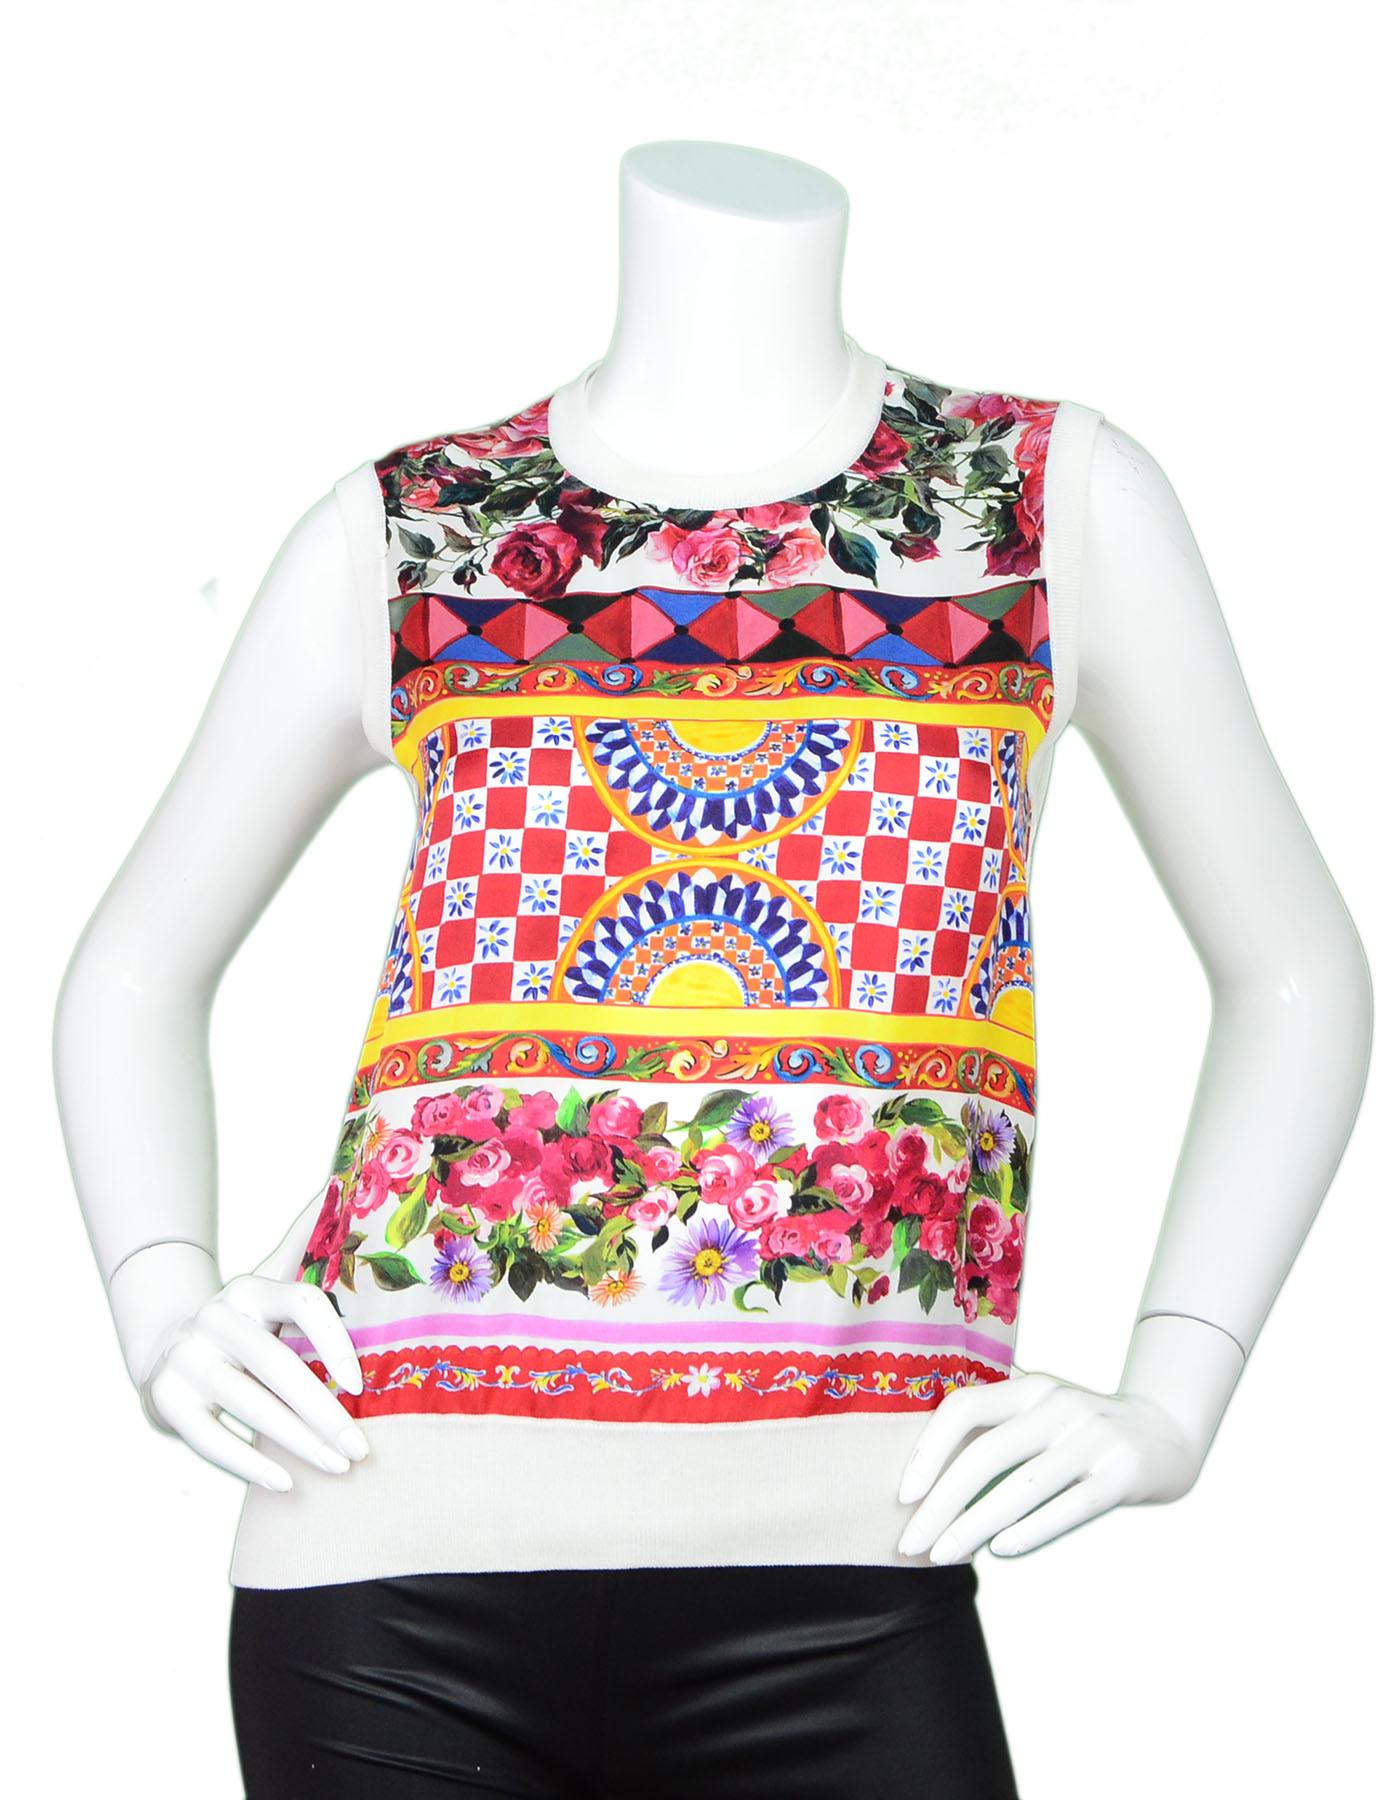 Dolce & Gabbana Silk Sleeveless Top Sz IT40

Made In: Italy
Color: Cream, multi
Composition: 100% silk
Closure/Opening: Pull over
Exterior Pockets: None
Interior Pockets: None
Overall Condition: Excellent pre-owned condition
Marked Size: IT 40 / US